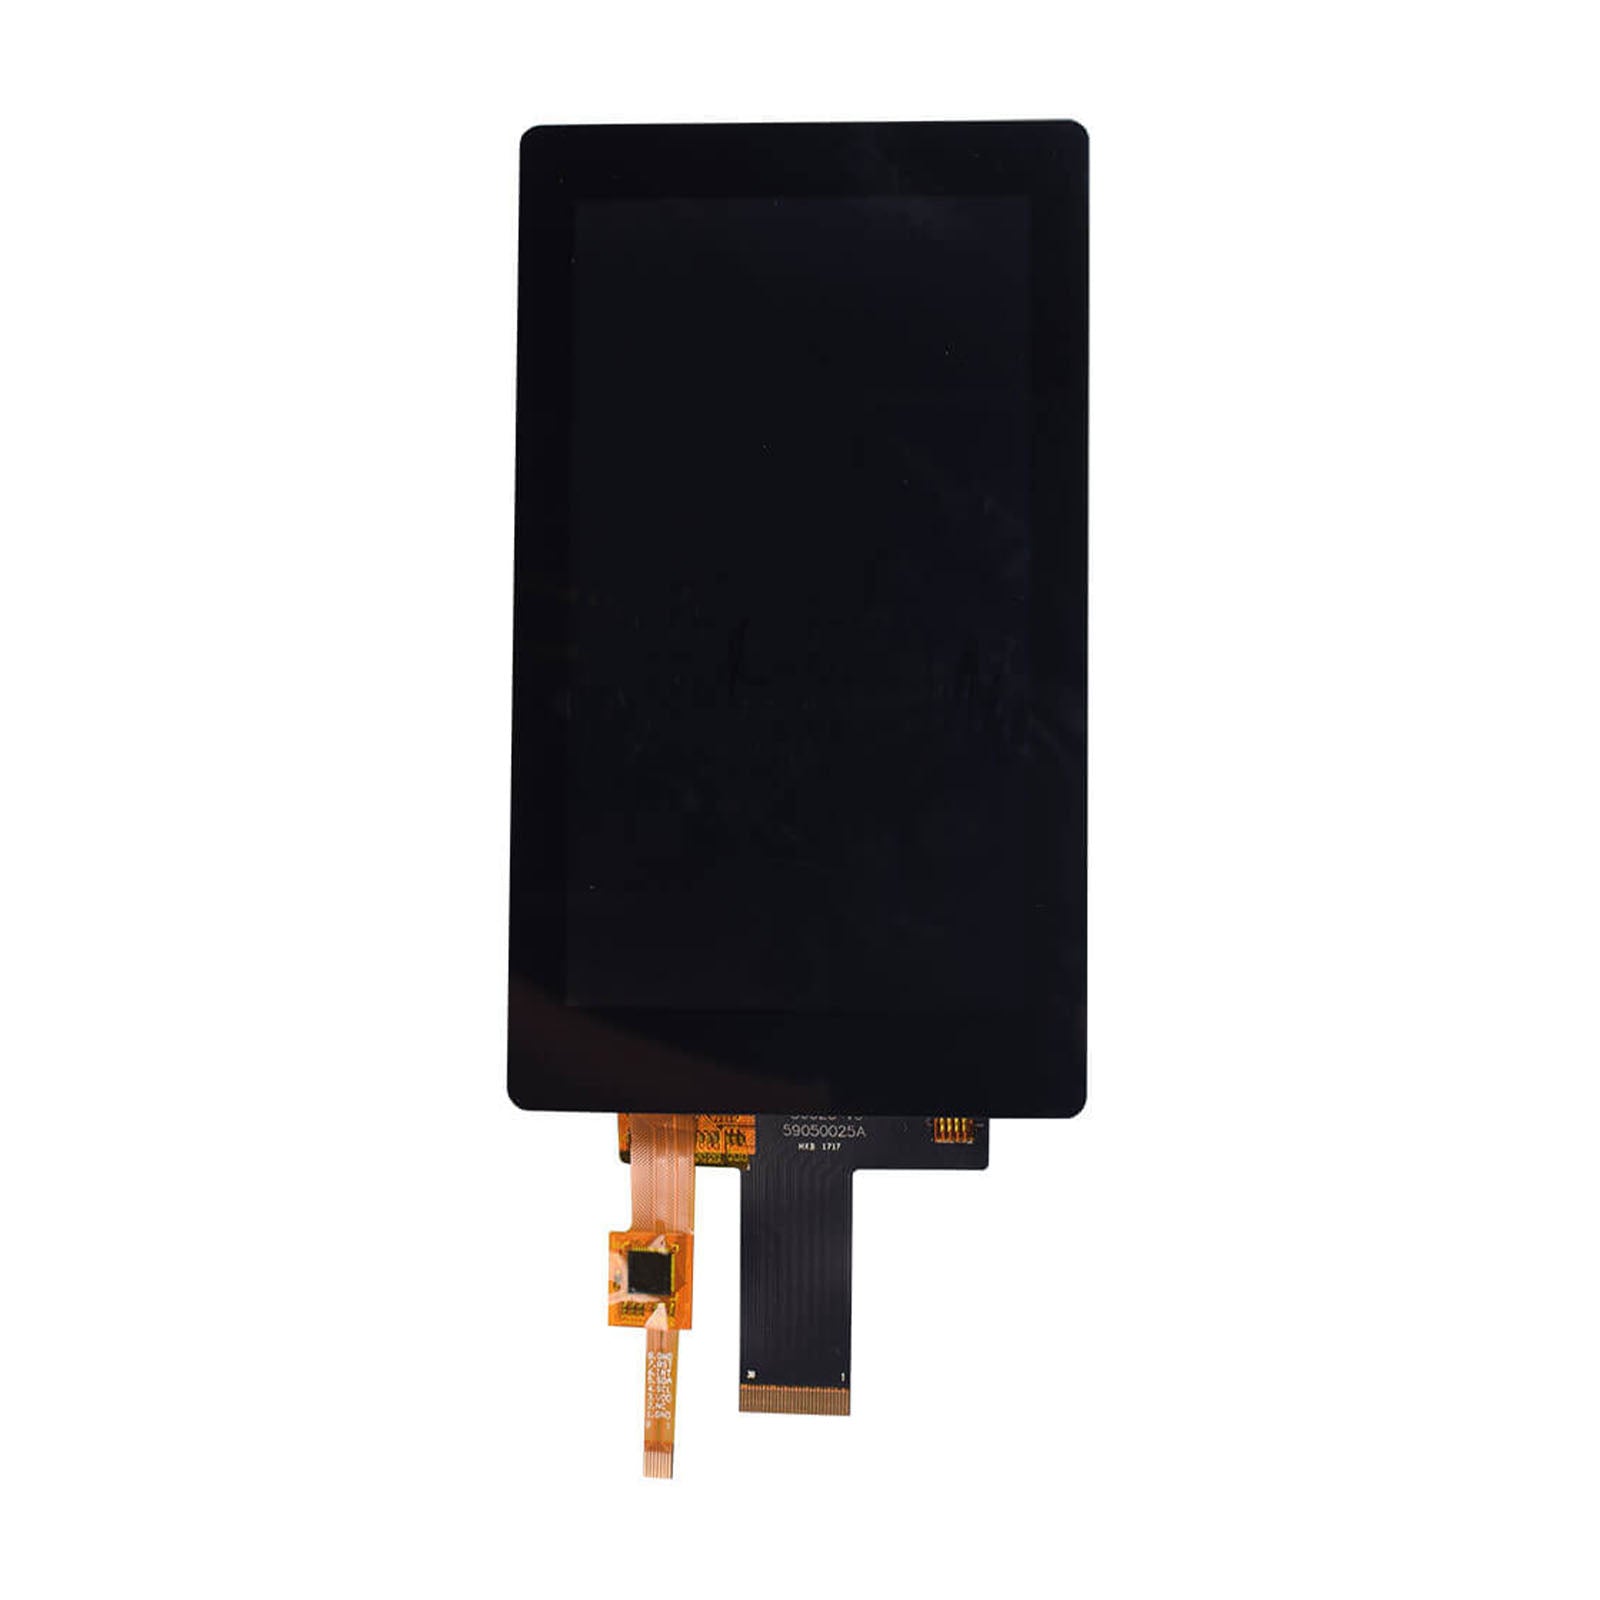 5-inch IPS display panel of 720x1280 resolution with capacitive touch and MIPI connection